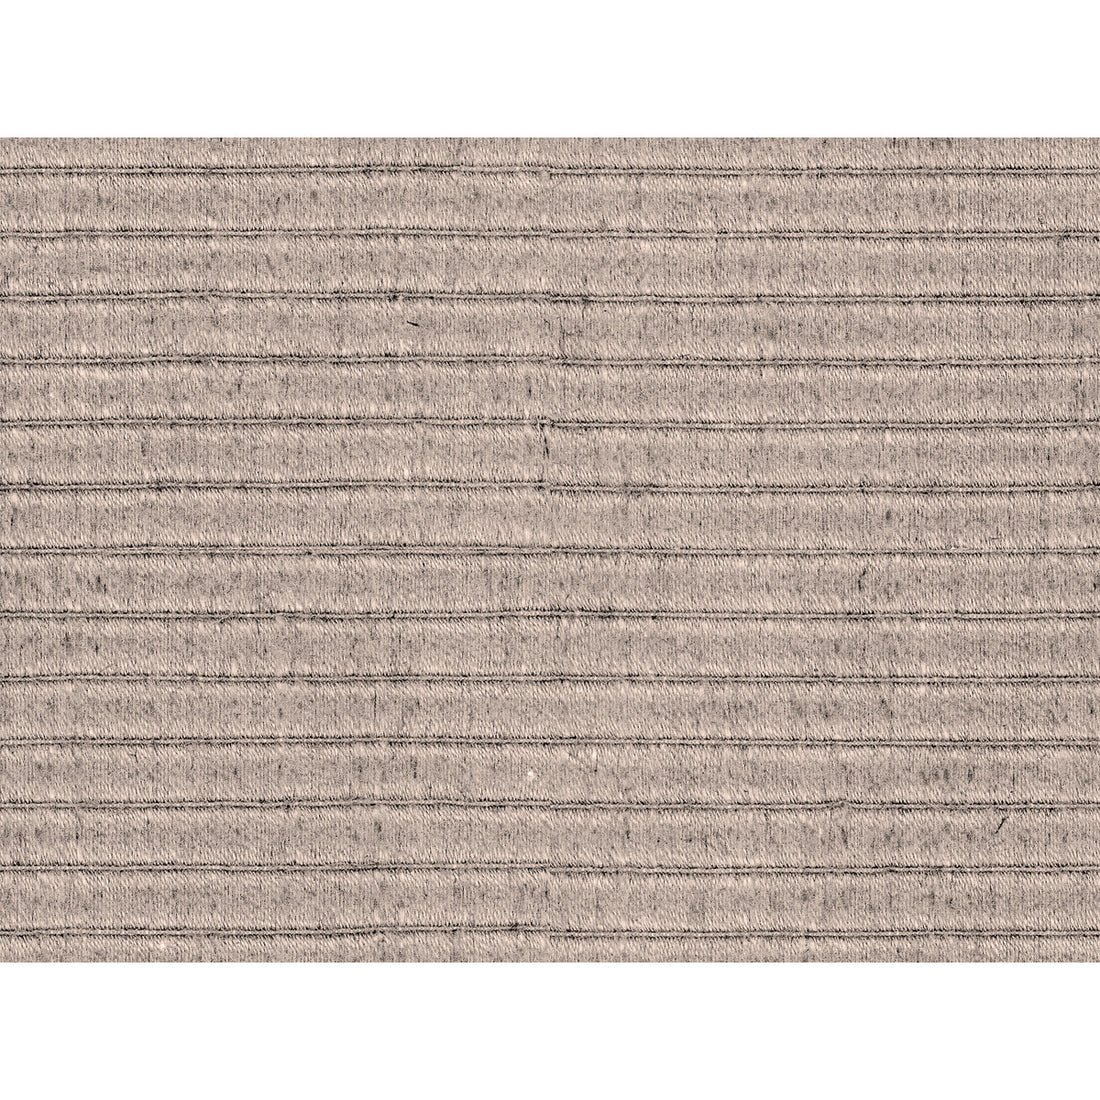 Heavy Weight fabric in pebble color - pattern 32995.106.0 - by Kravet Couture